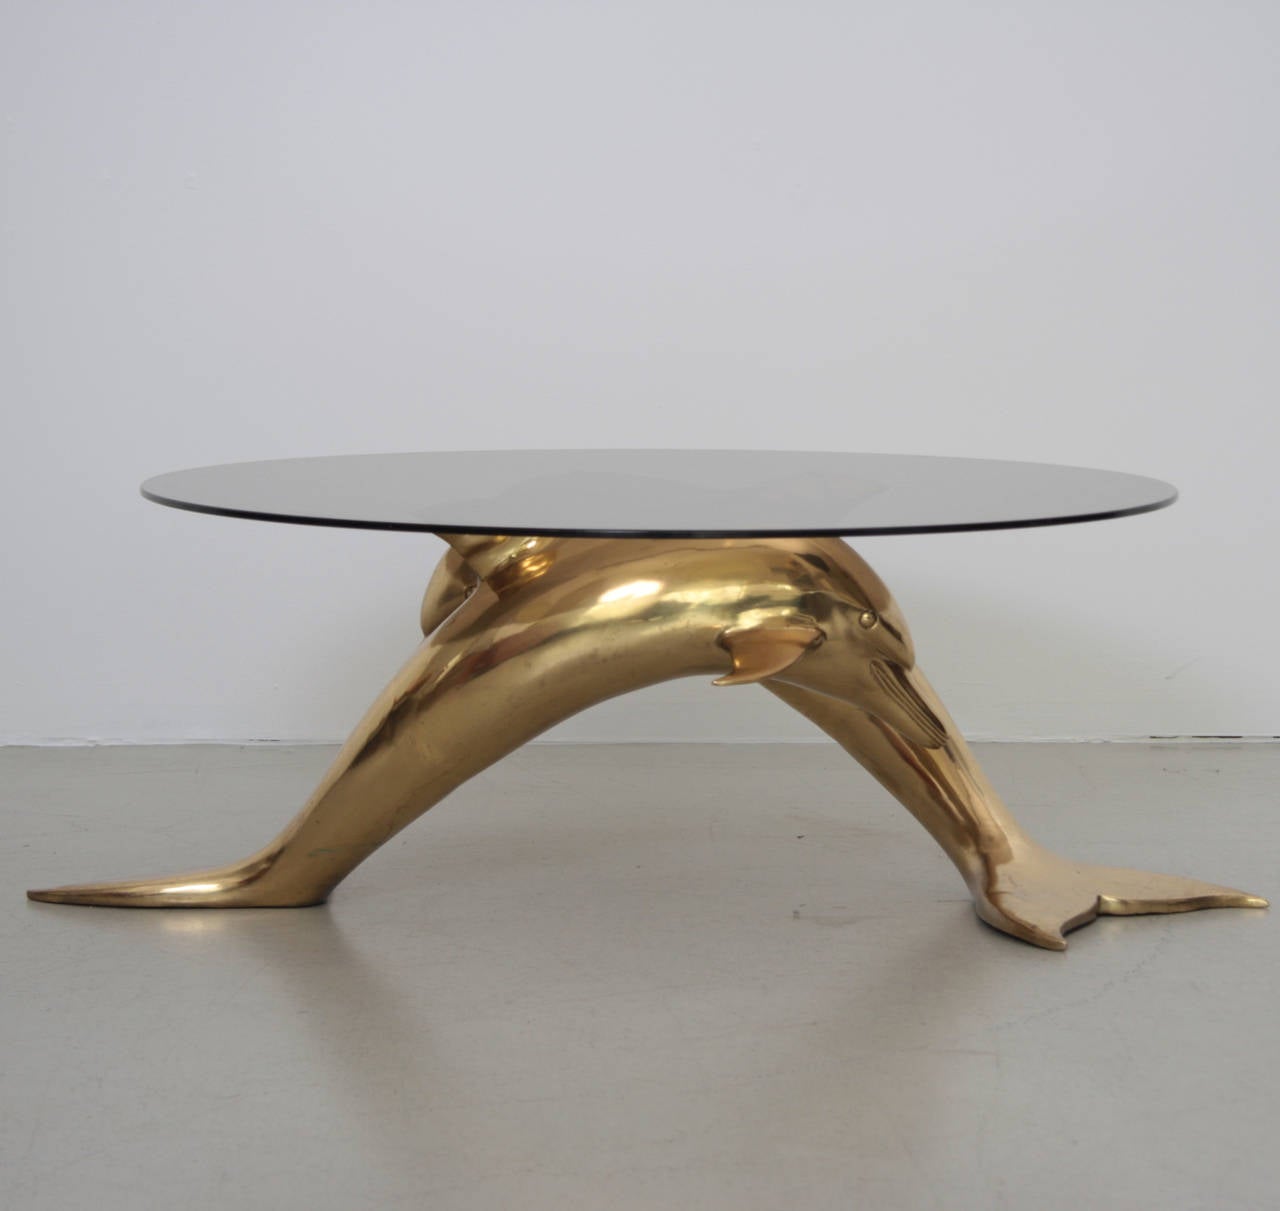 Very elegant and huge coffee table in brass and glass. The  glass table top is holded by two brass dolphins. The table is a really eyecatcher. The base shows scratches on the brass.

